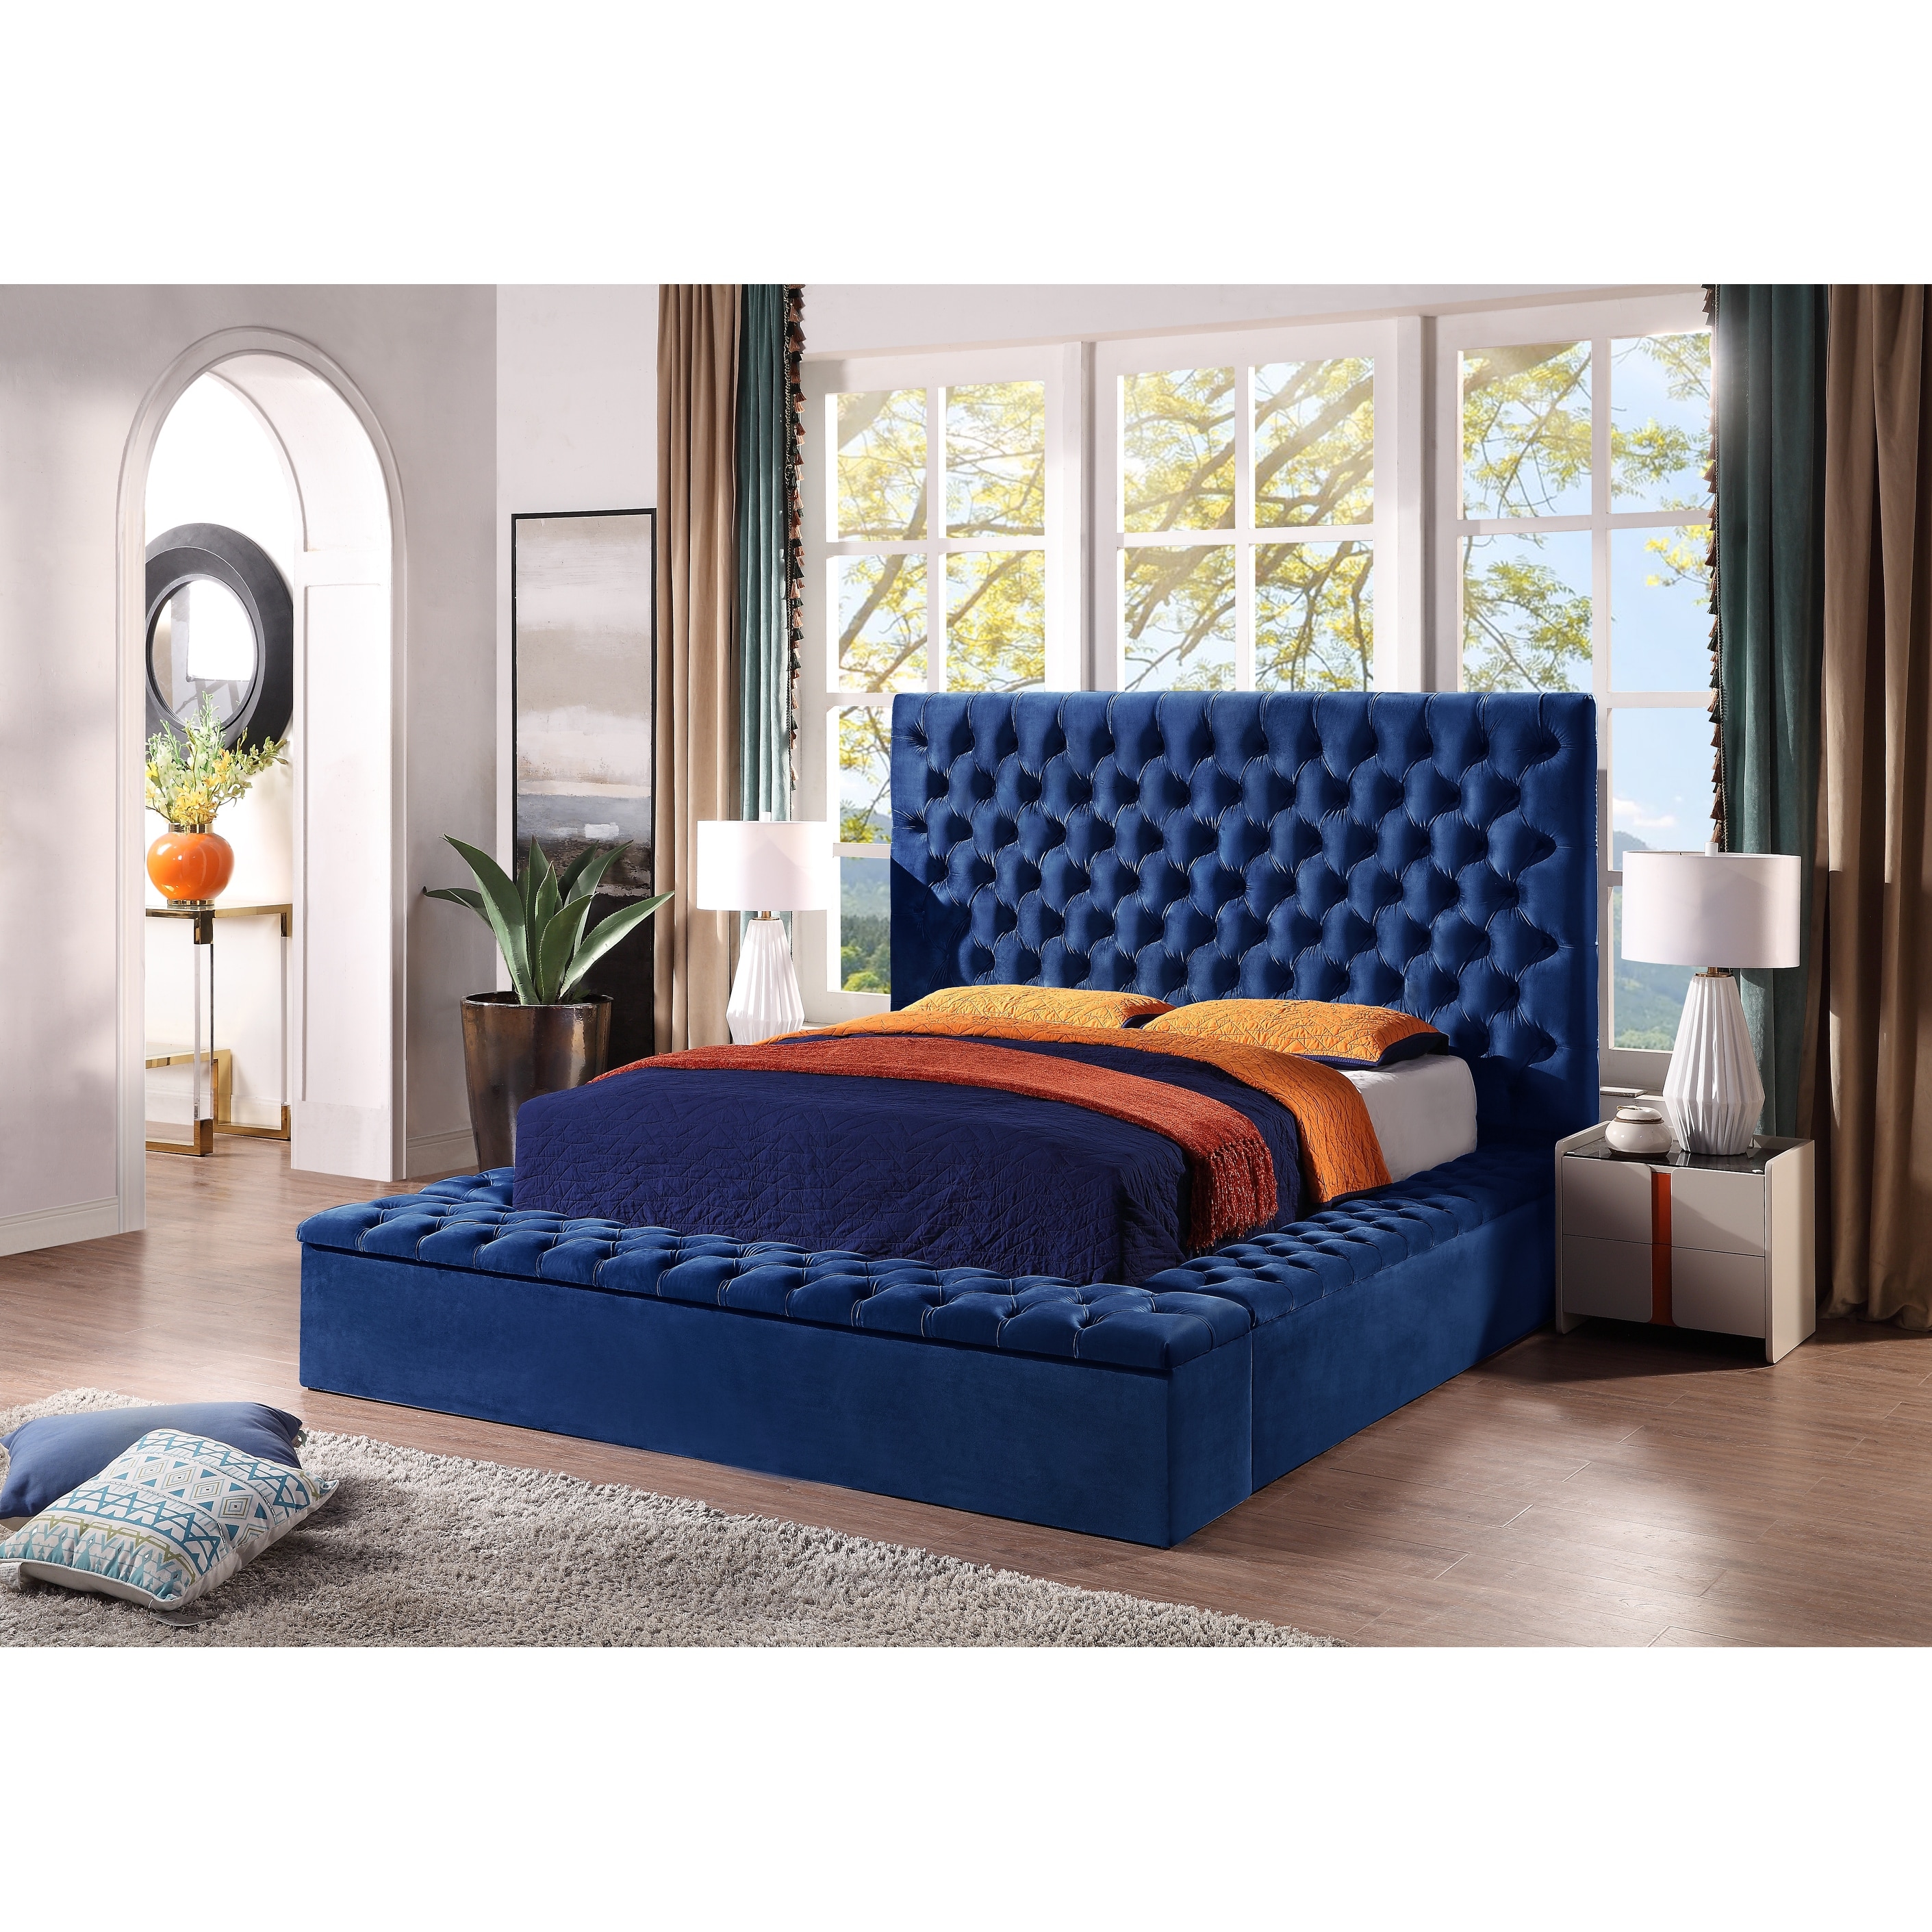 Contemporary Velvet Upholstered Bed With Storage Locker  Deep Button Tufting  Solid Wood Frame  High-density Foam